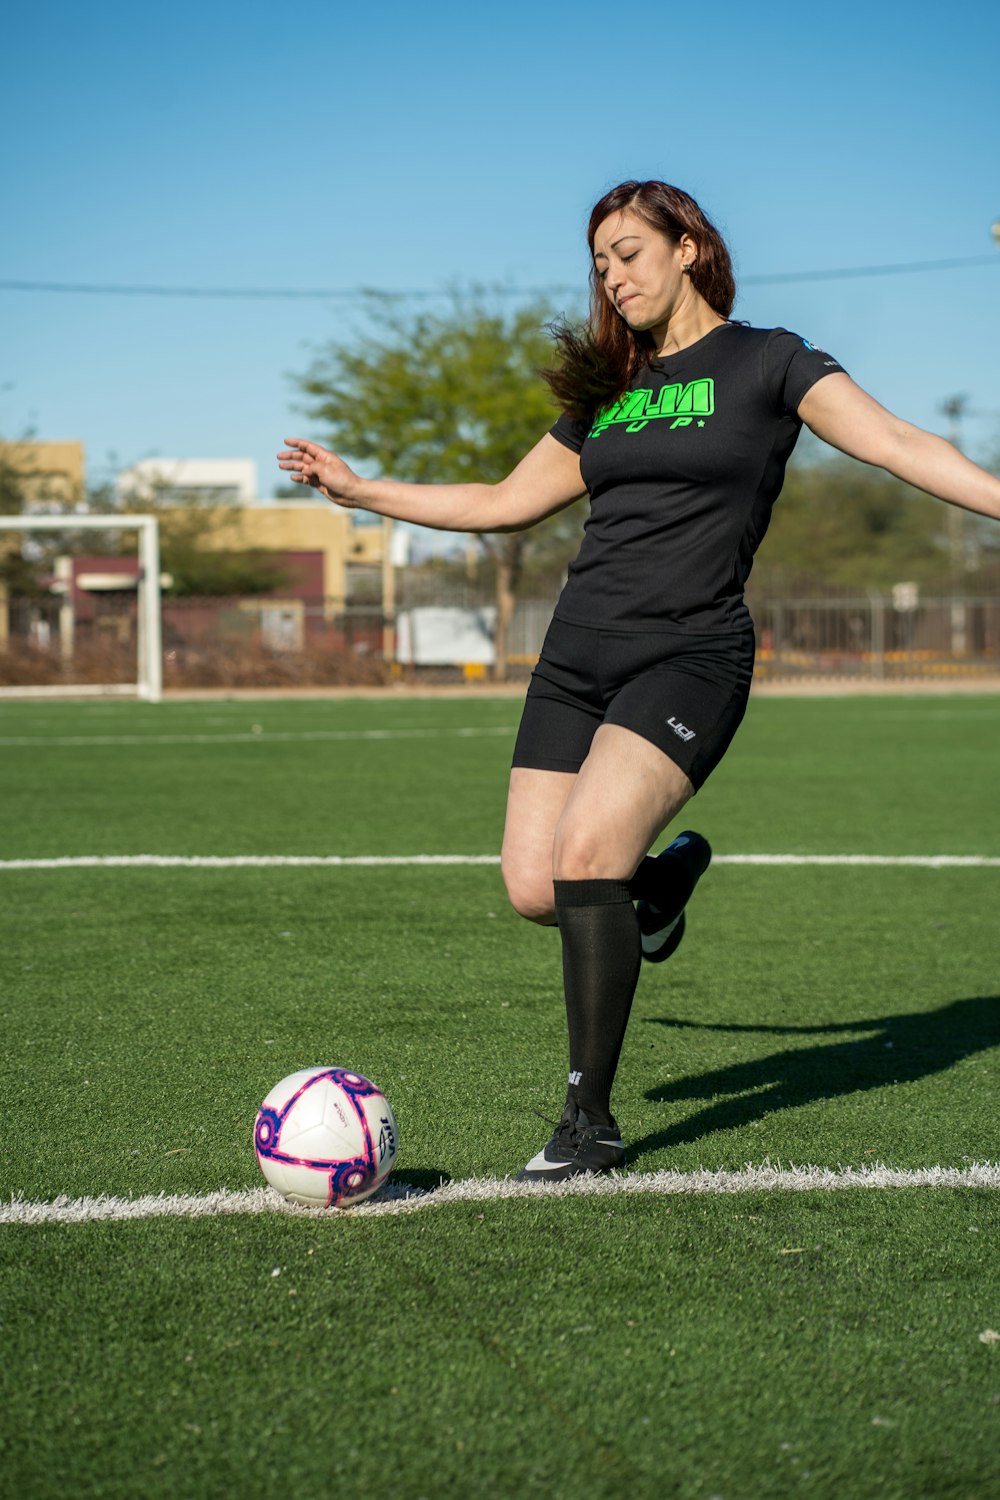 woman in black shirt and black shorts playing soccer during daytime